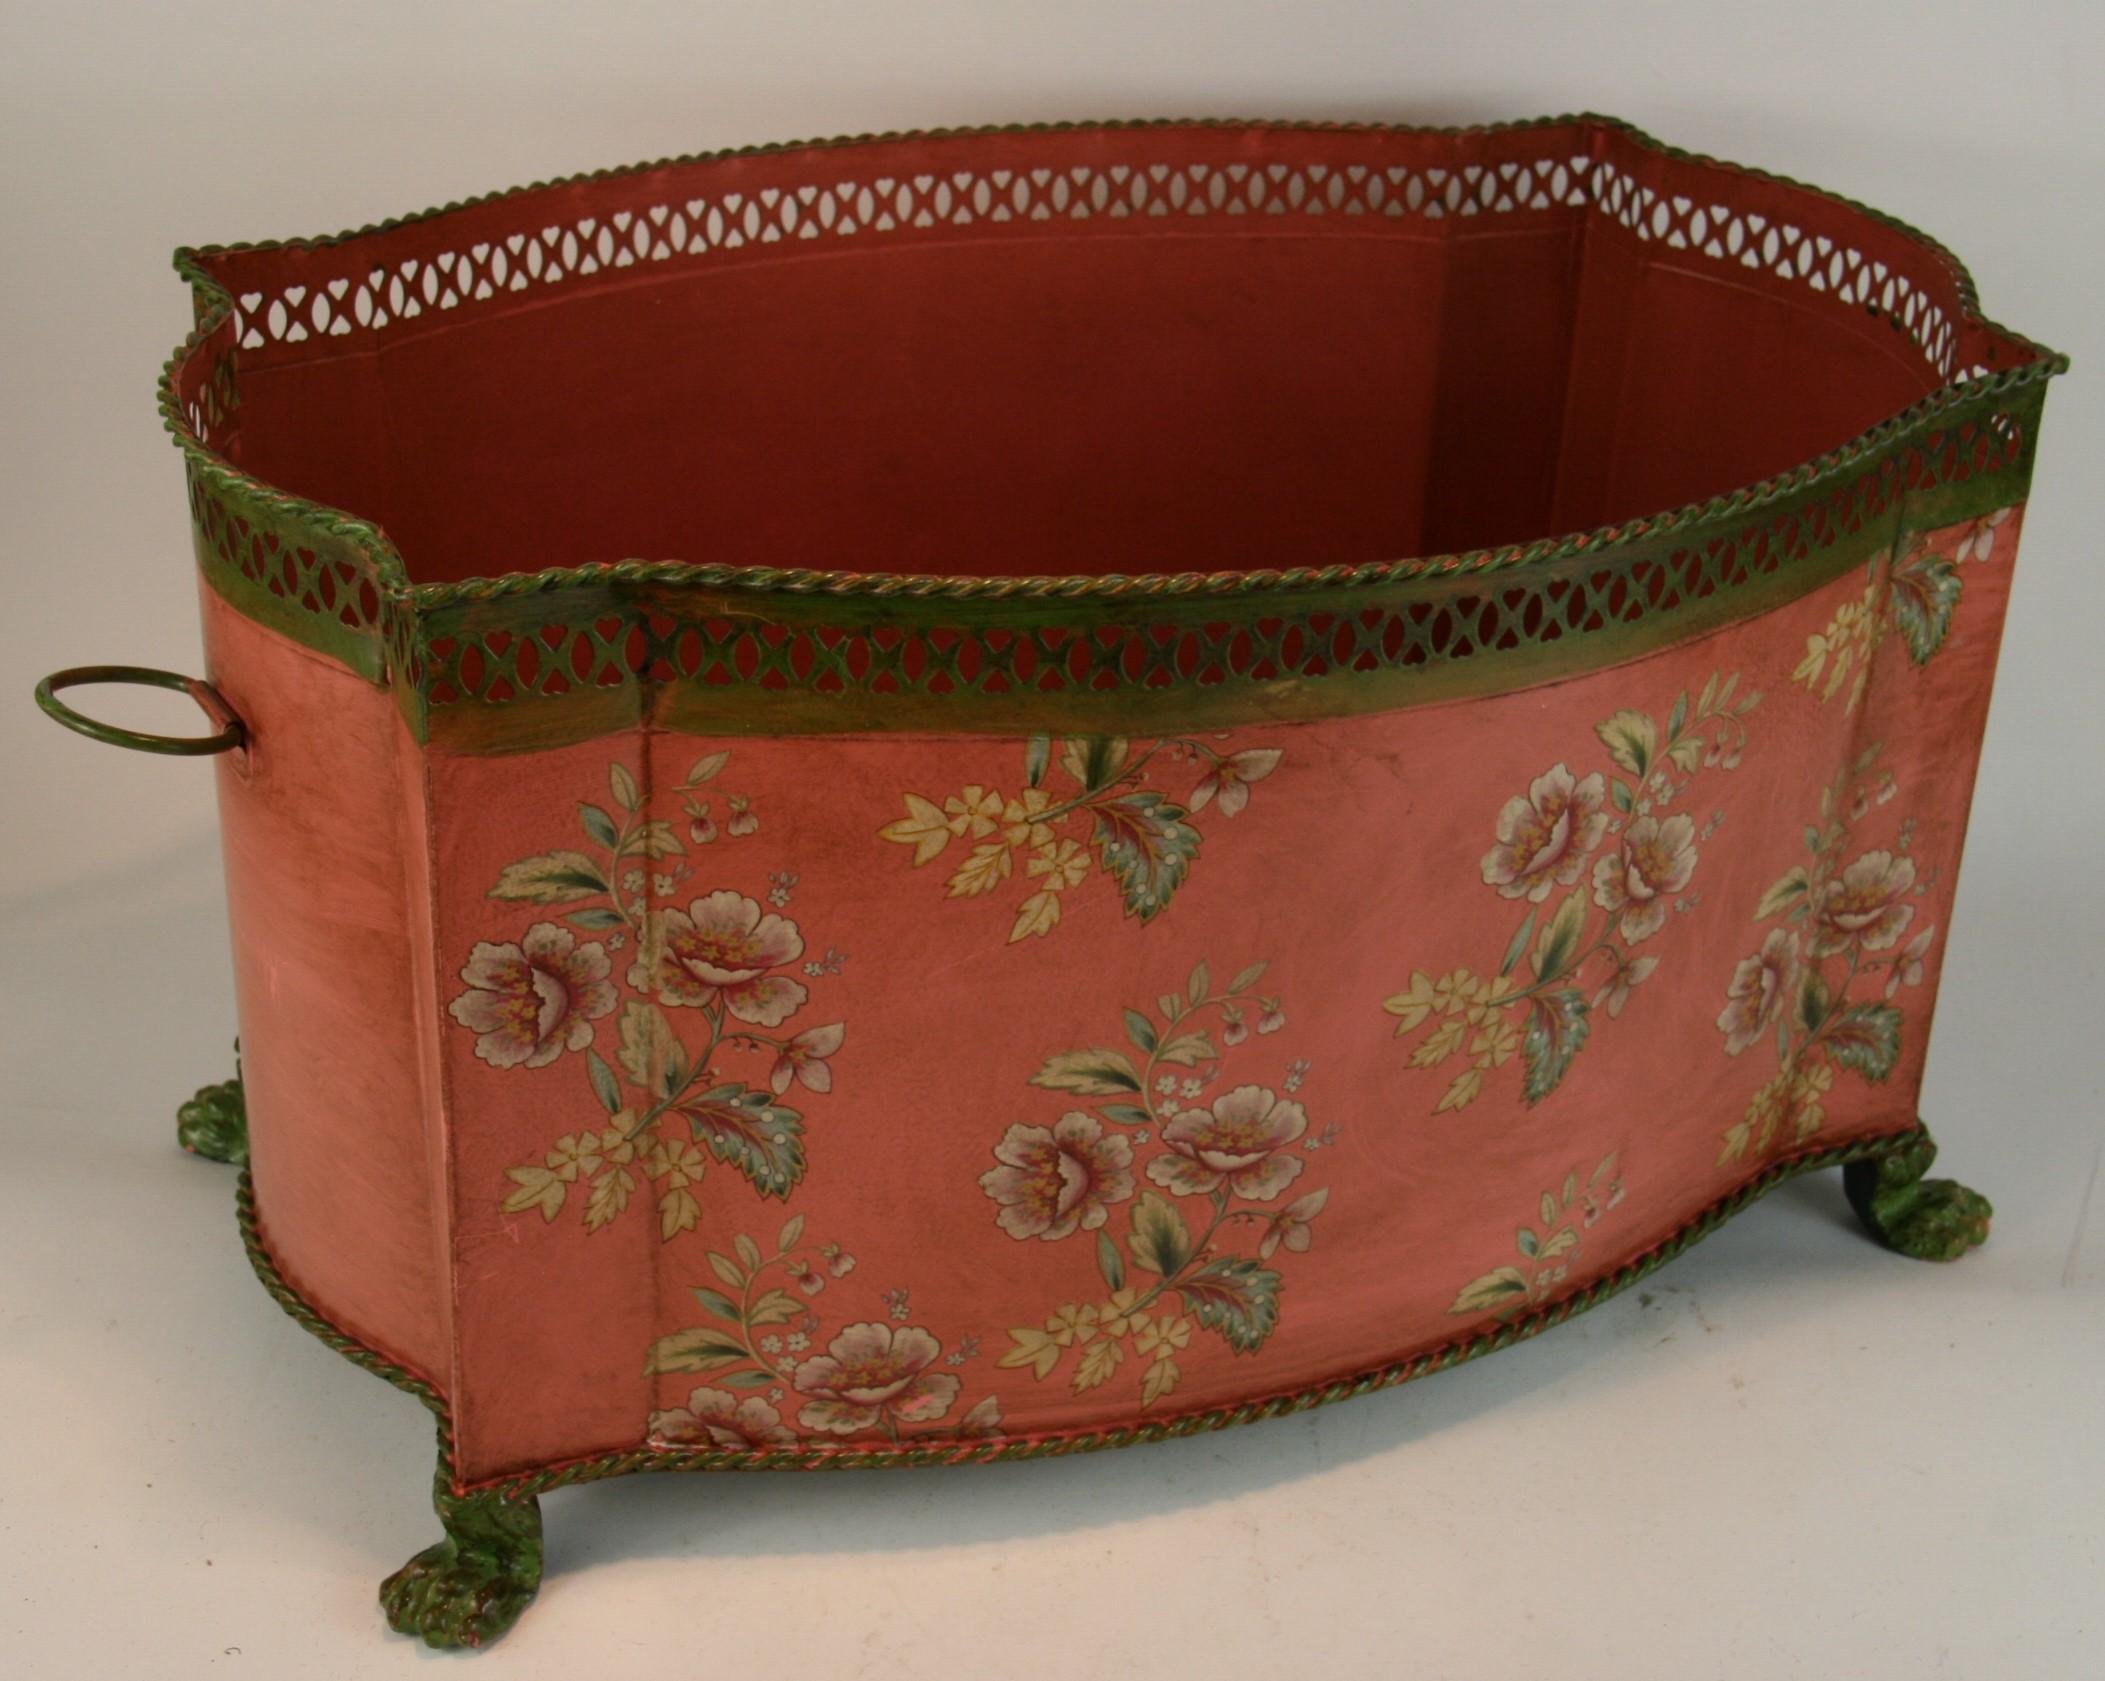 3-460 Tole colorful catchall with lions paw feet and filigree trim
Useful in many areas of the house.